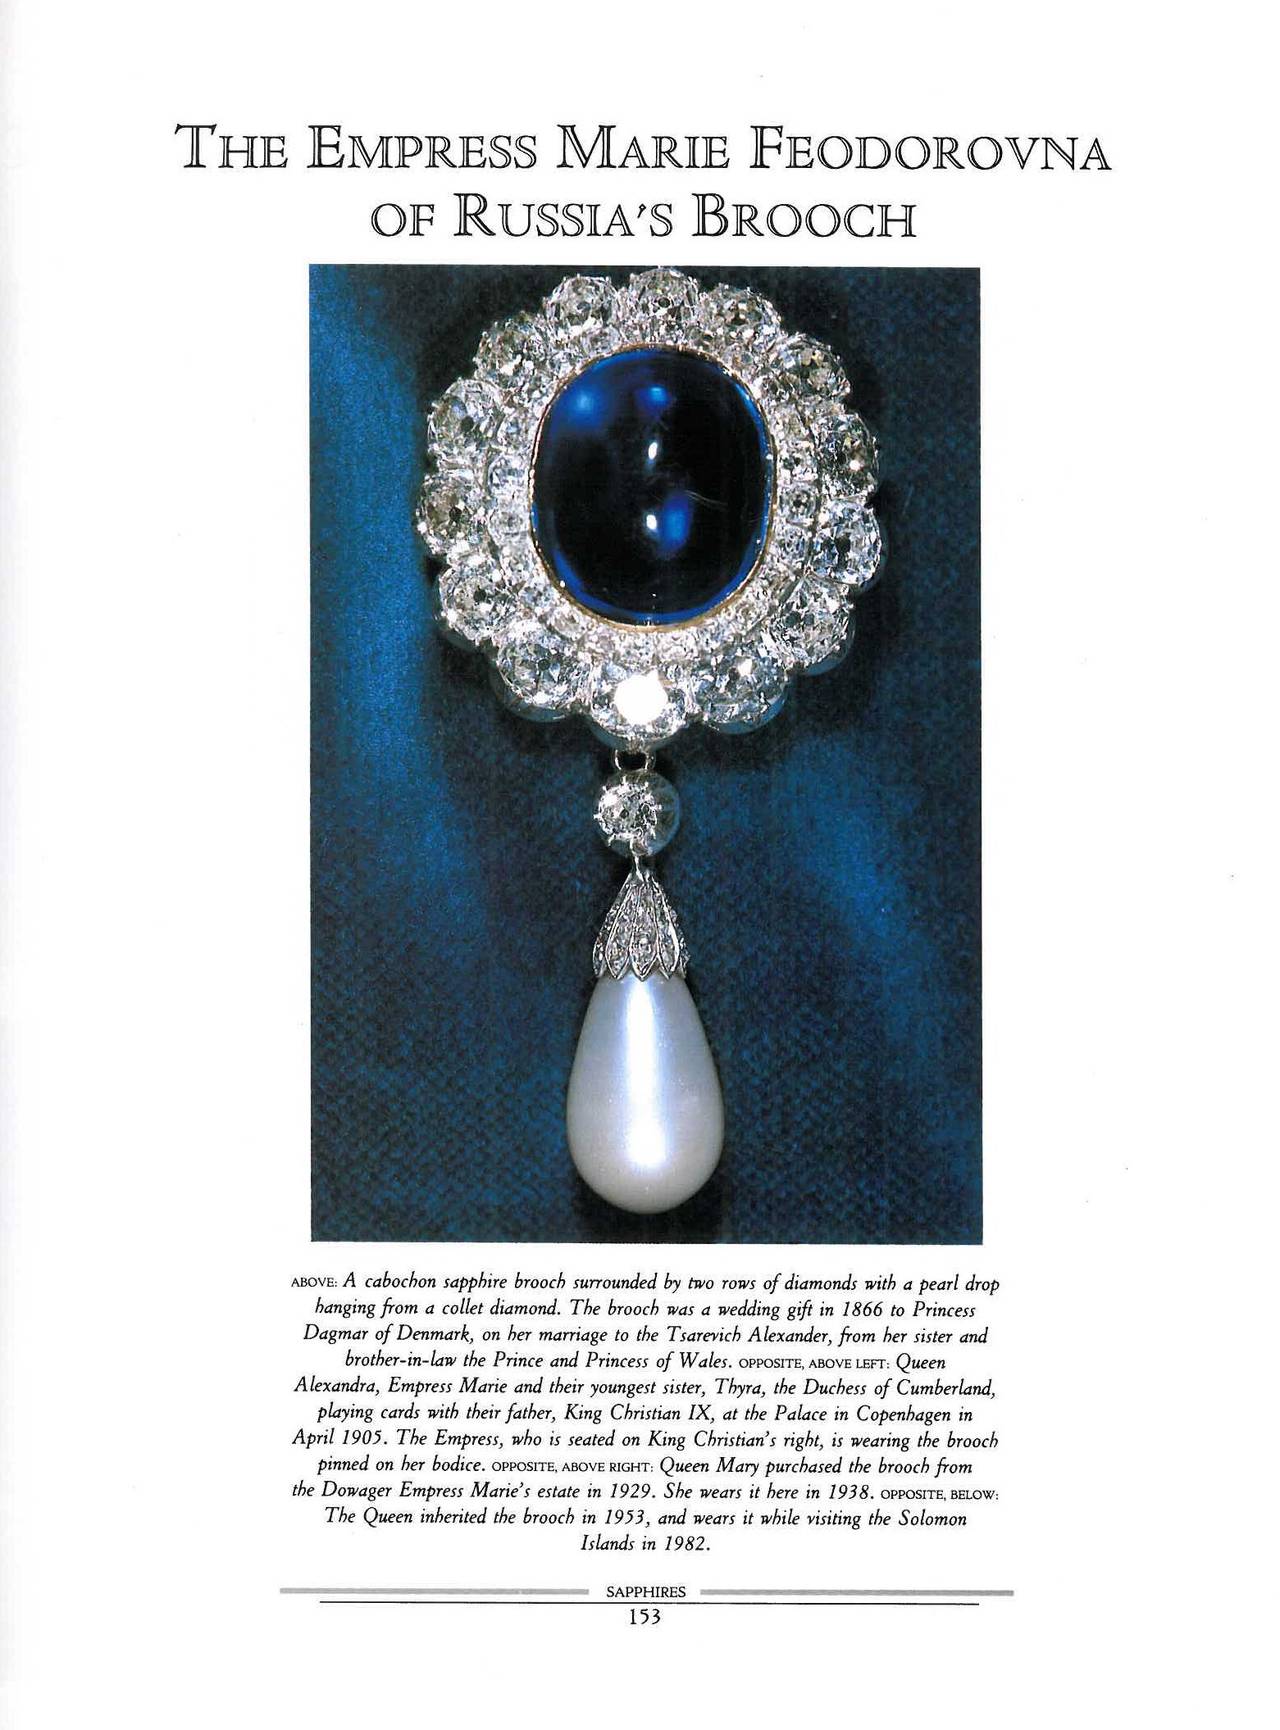 Book of THE QUEEN'S JEWELS - The Personal Collection of Elizabeth ll 3